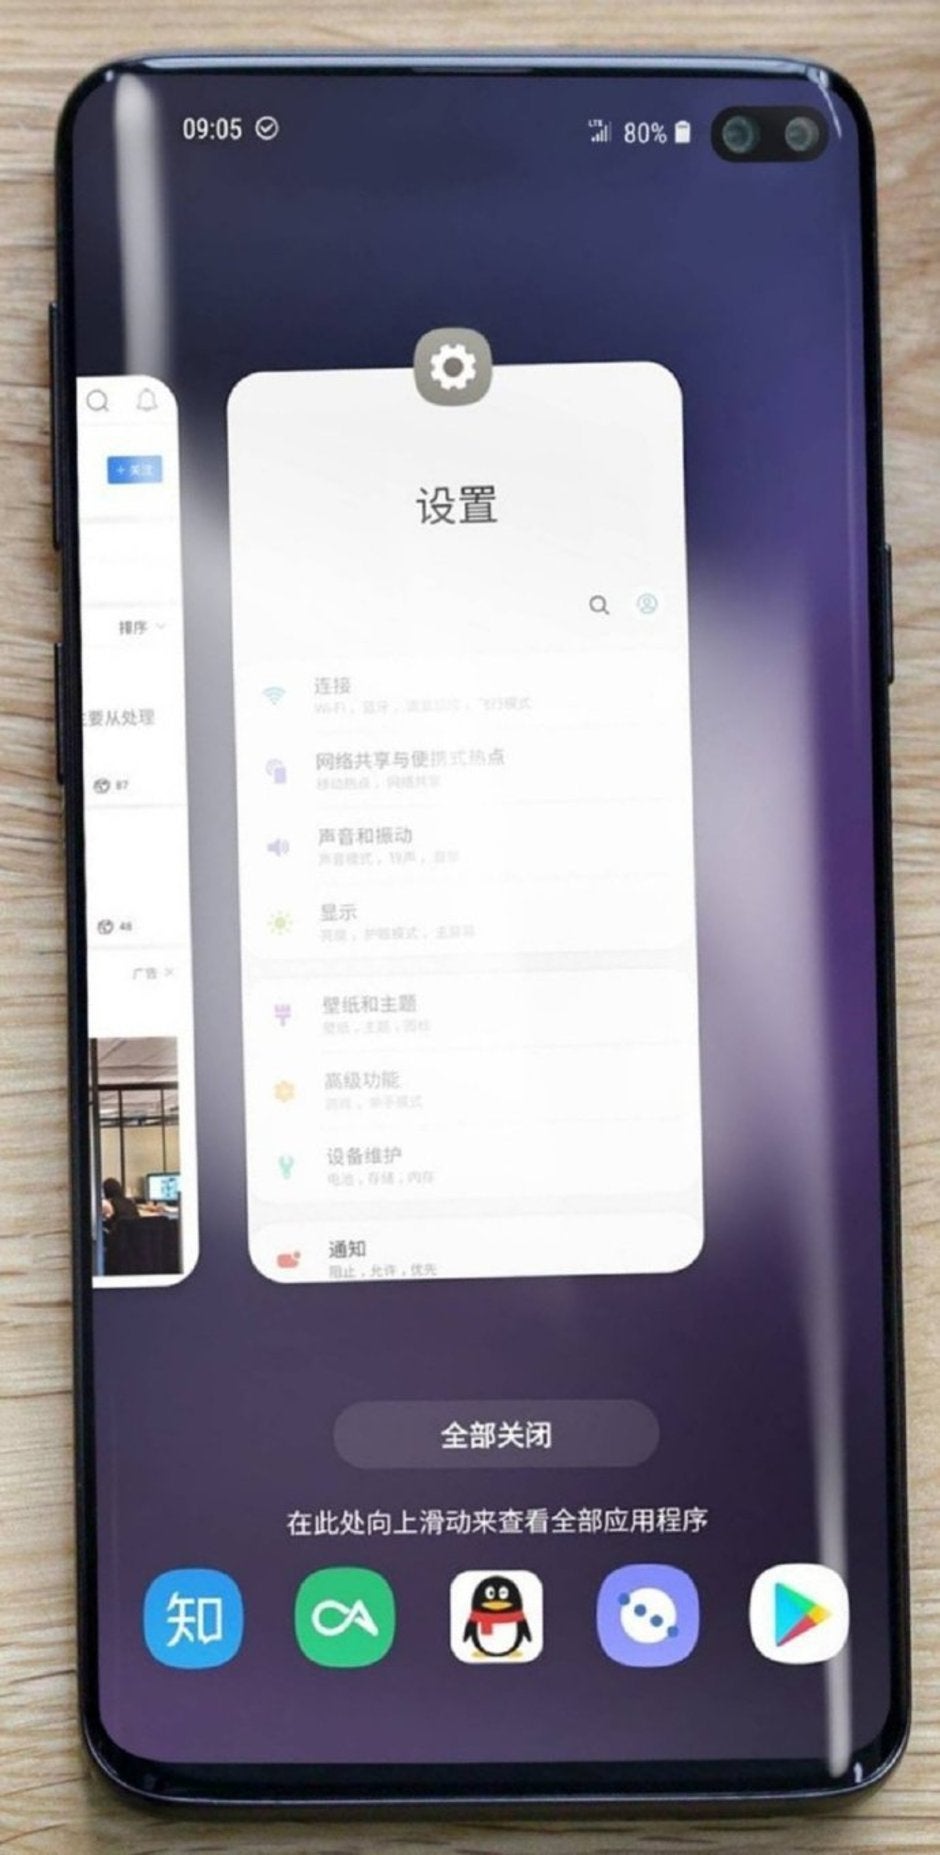 Weibo leak on the left, AllAboutSamsung leak from a few days ago on the right - Latest leak supposedly shows the Samsung Galaxy S10+ up close